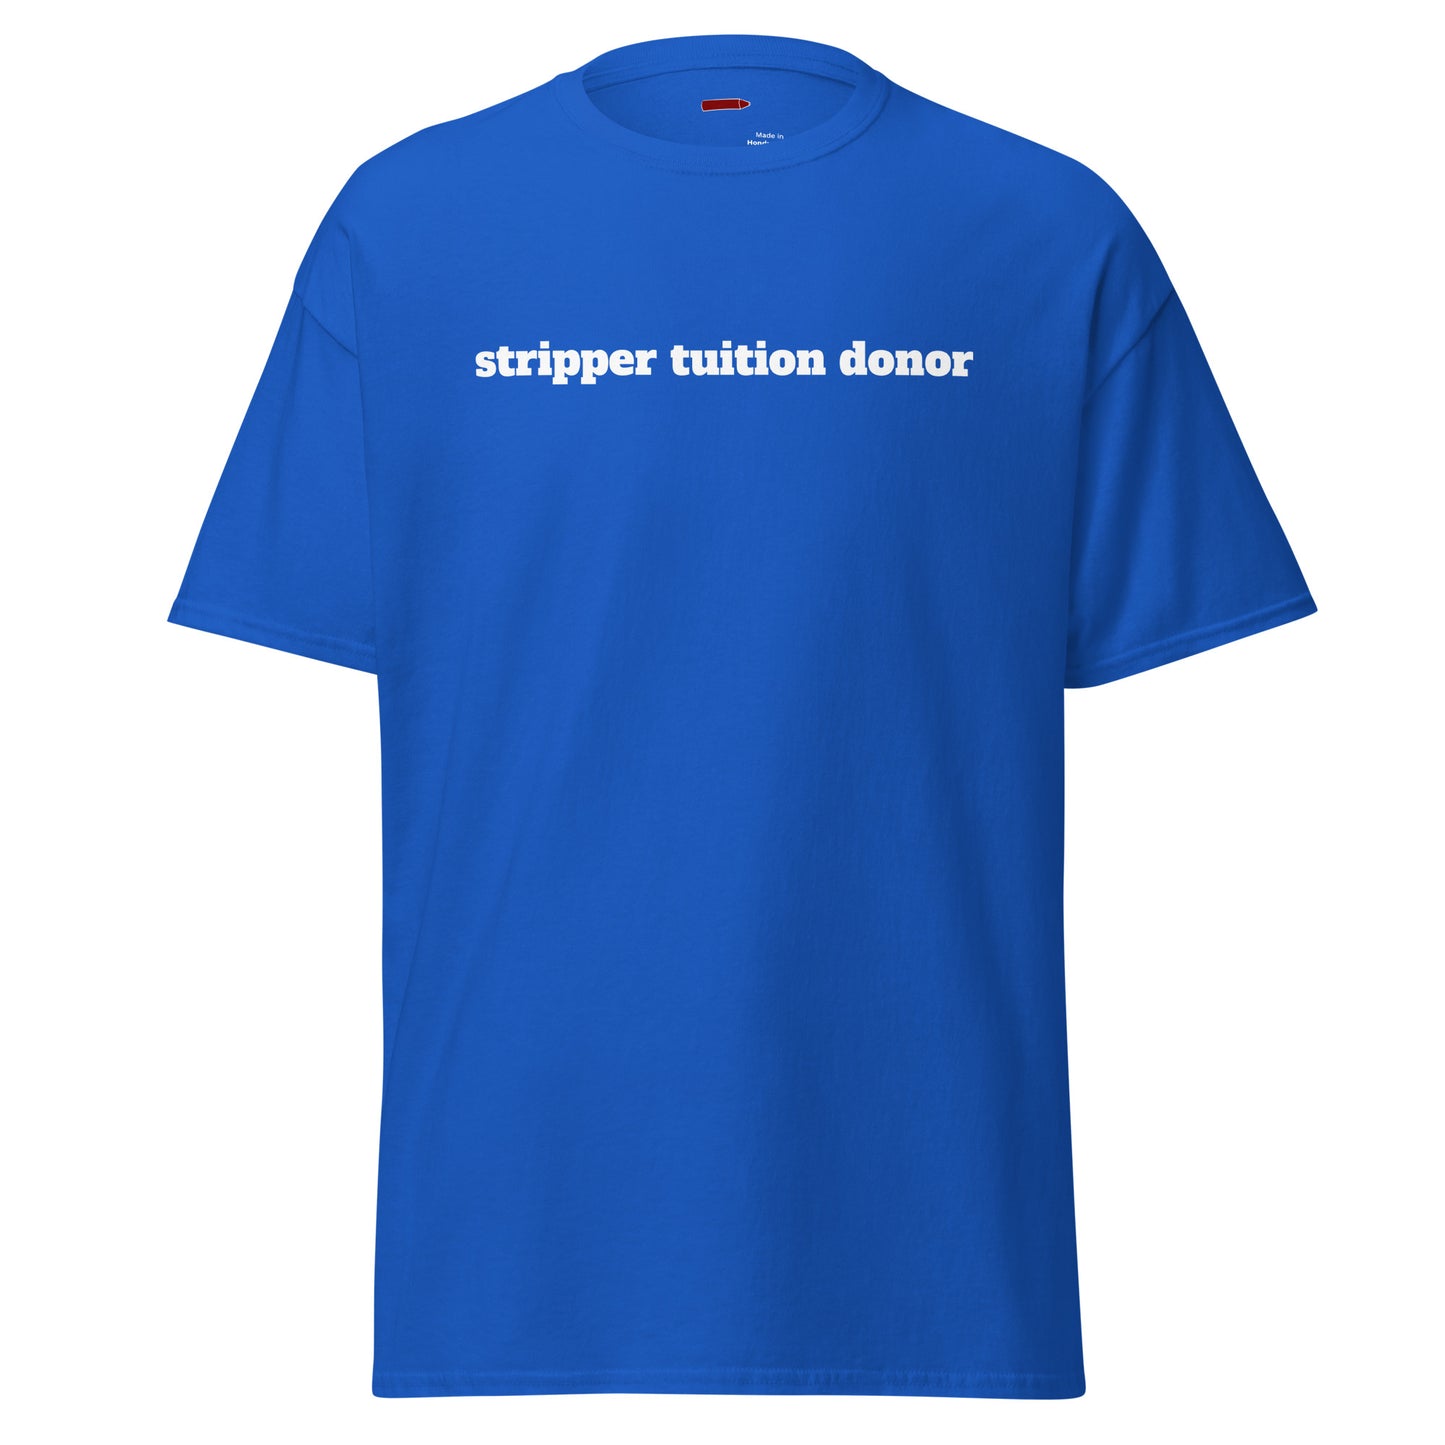 stripper tuition donor - Men's T-Shirt